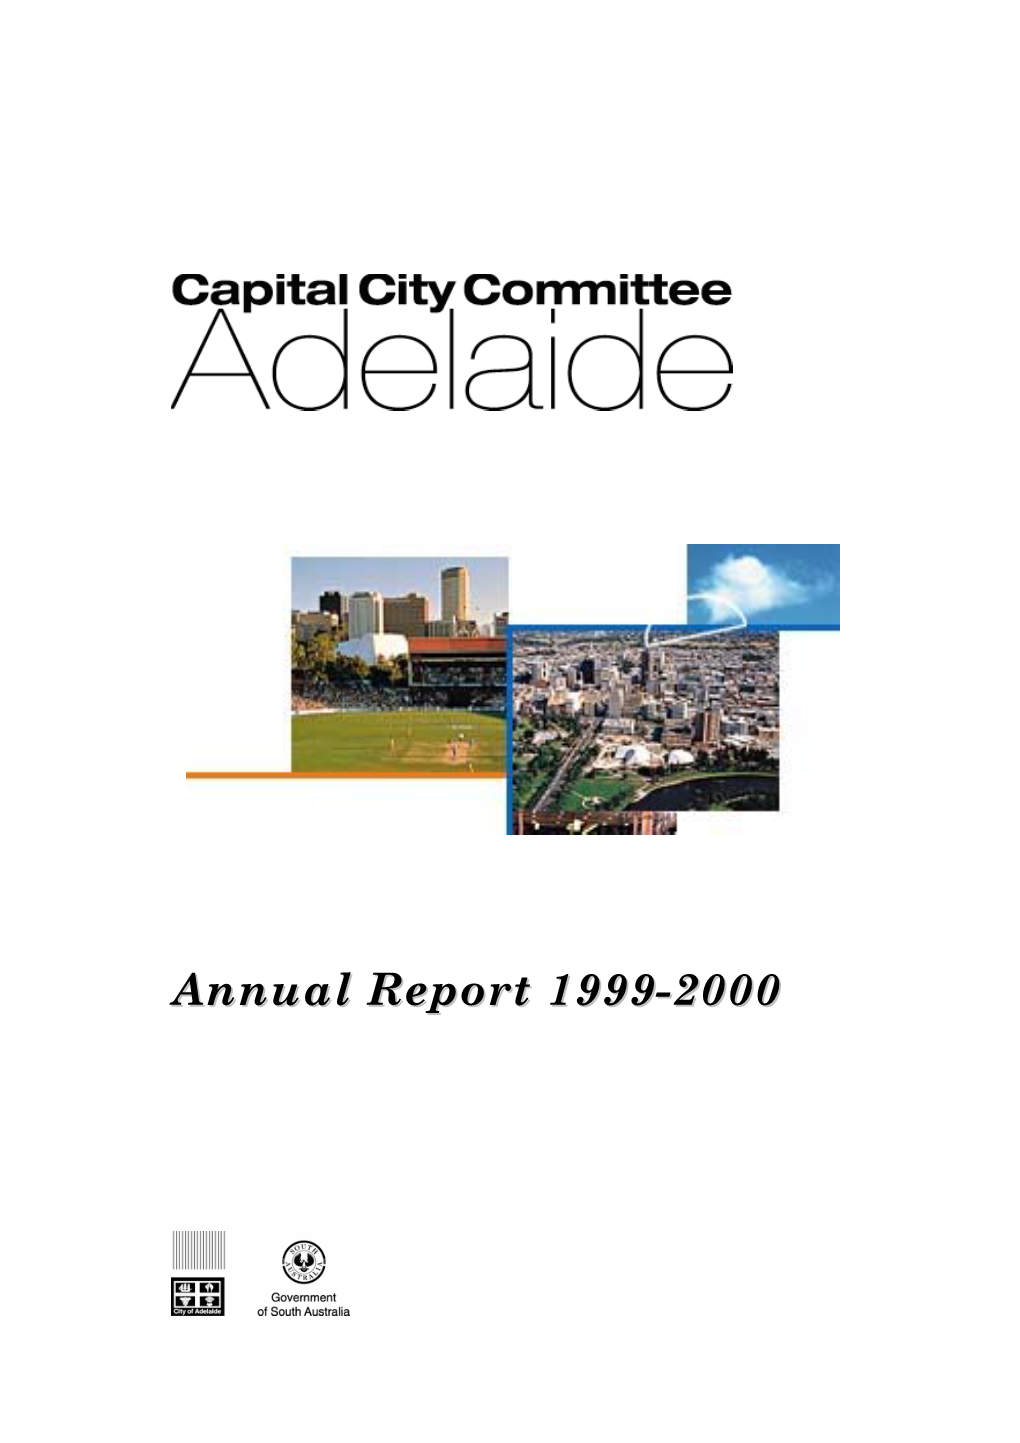 Capital City Committee Annual Report 1999-2000